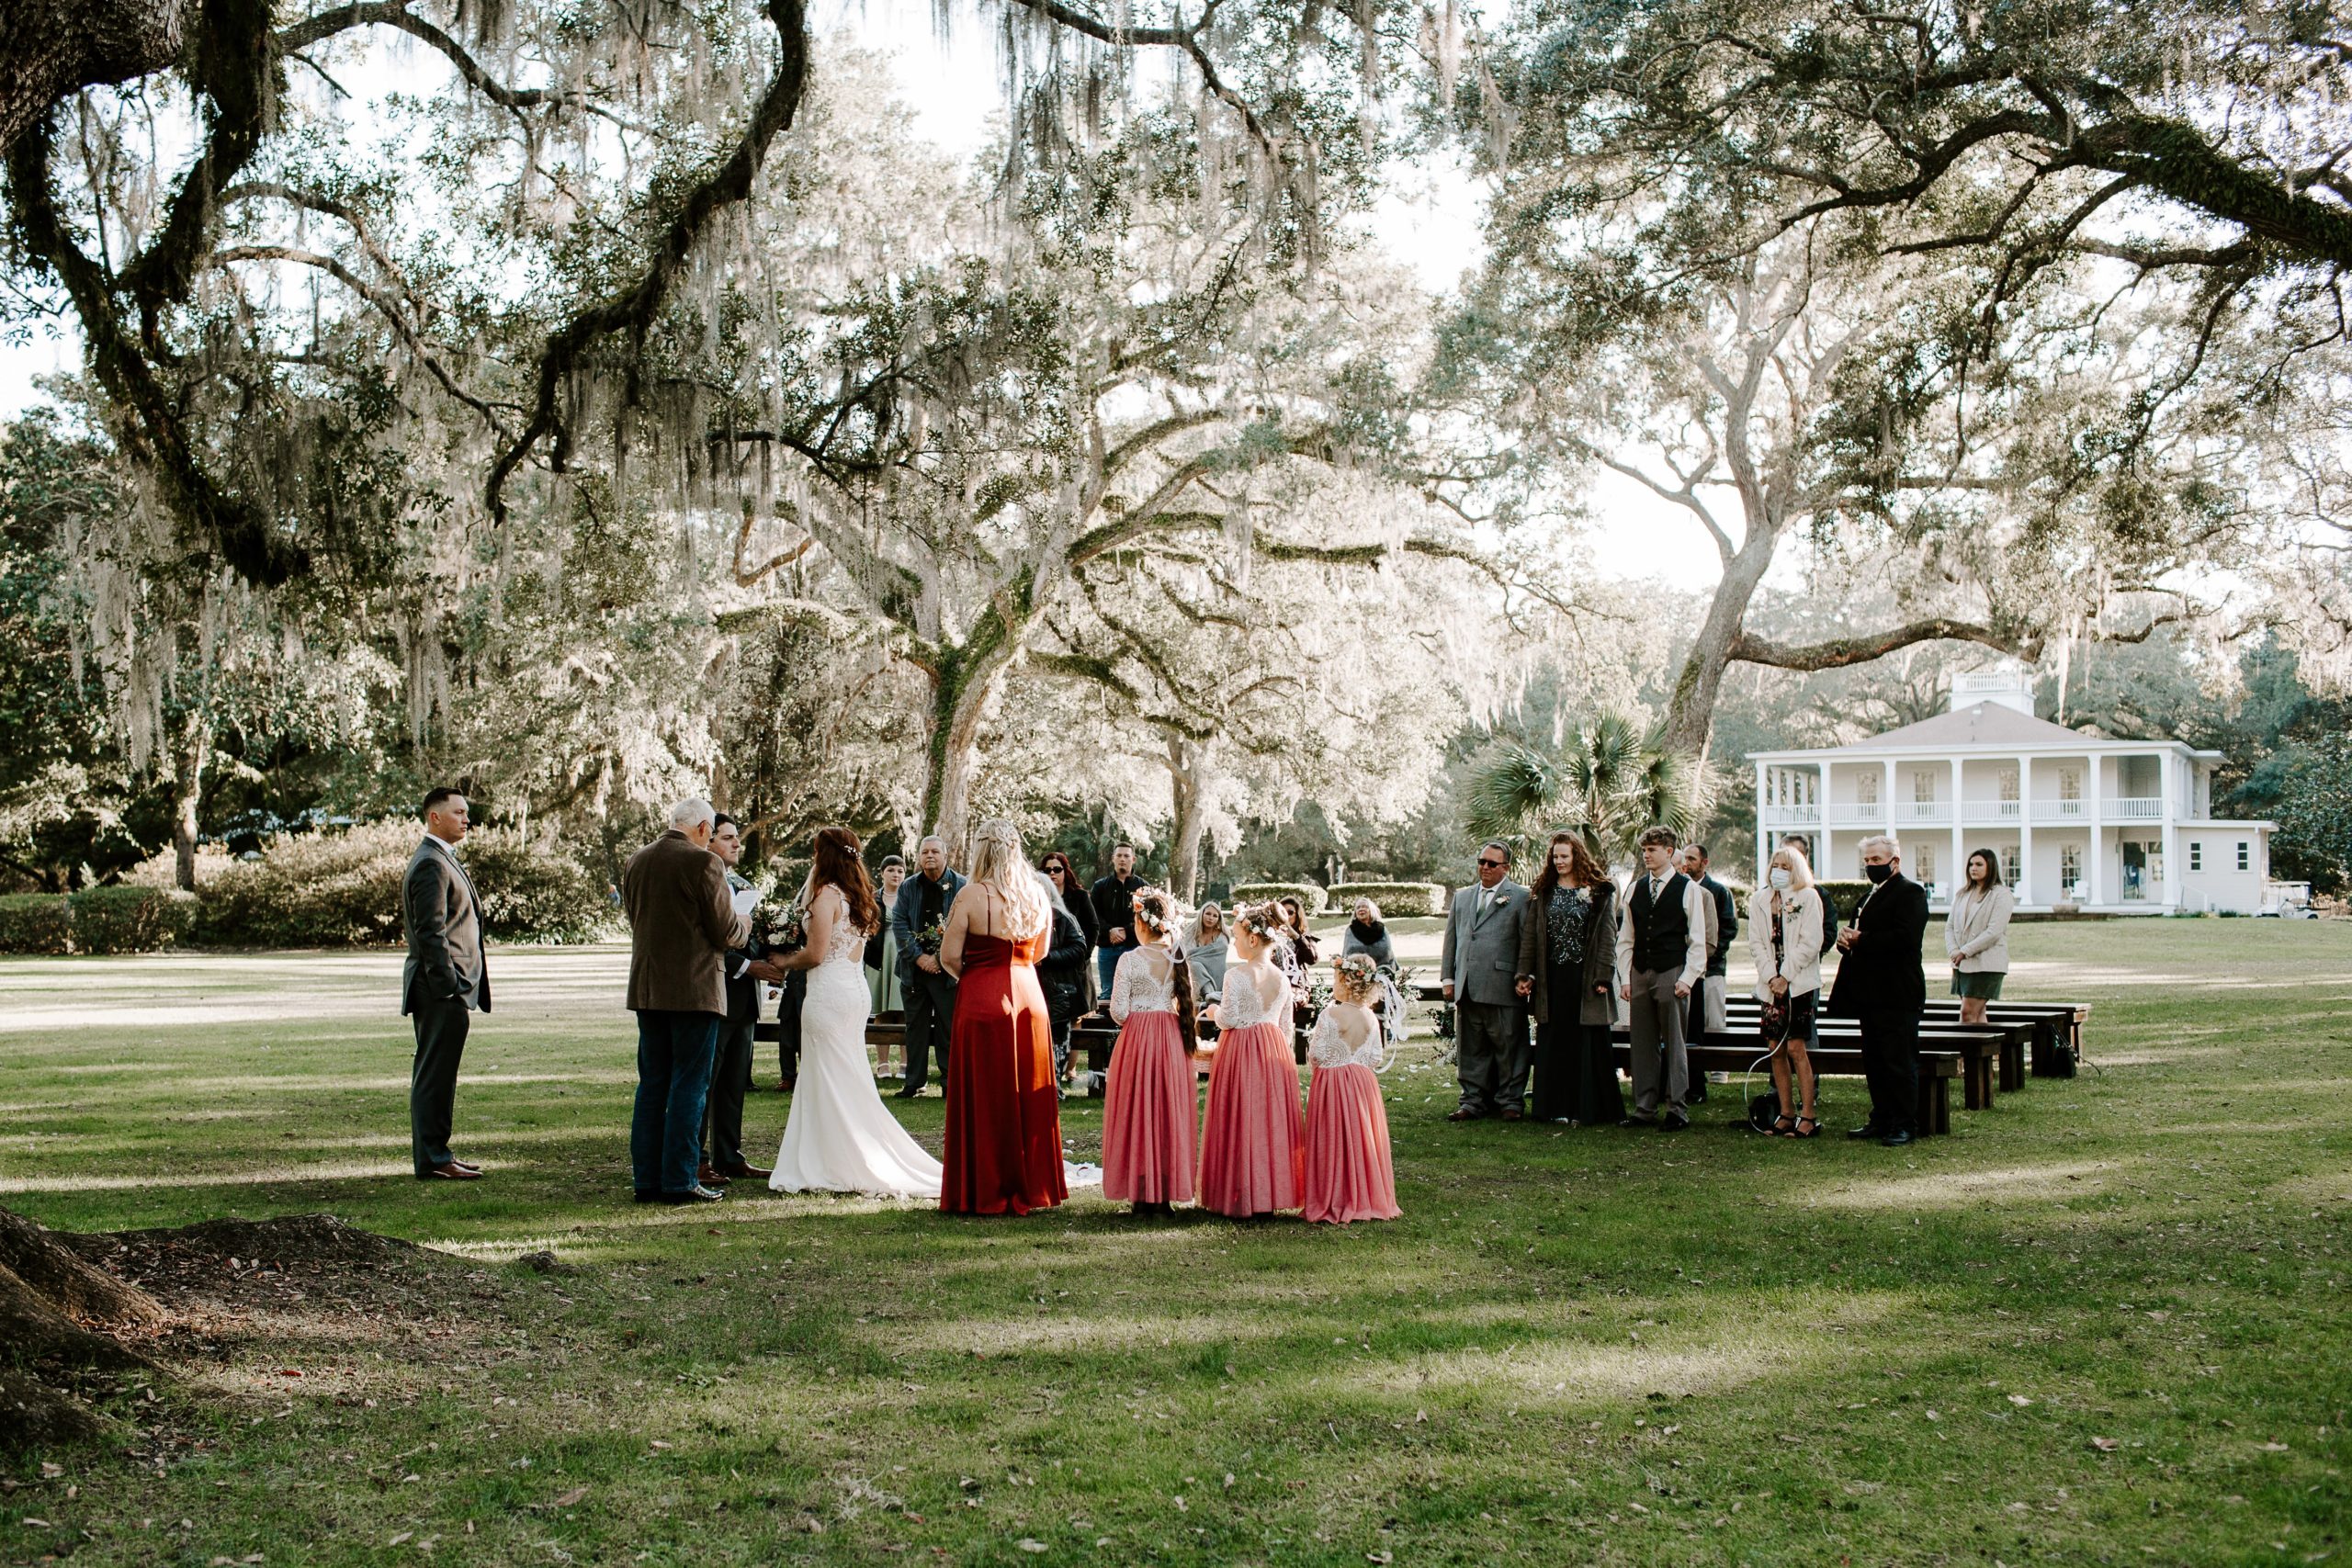 Wedding party and guests standing under a large oak tree as the couple says their vows